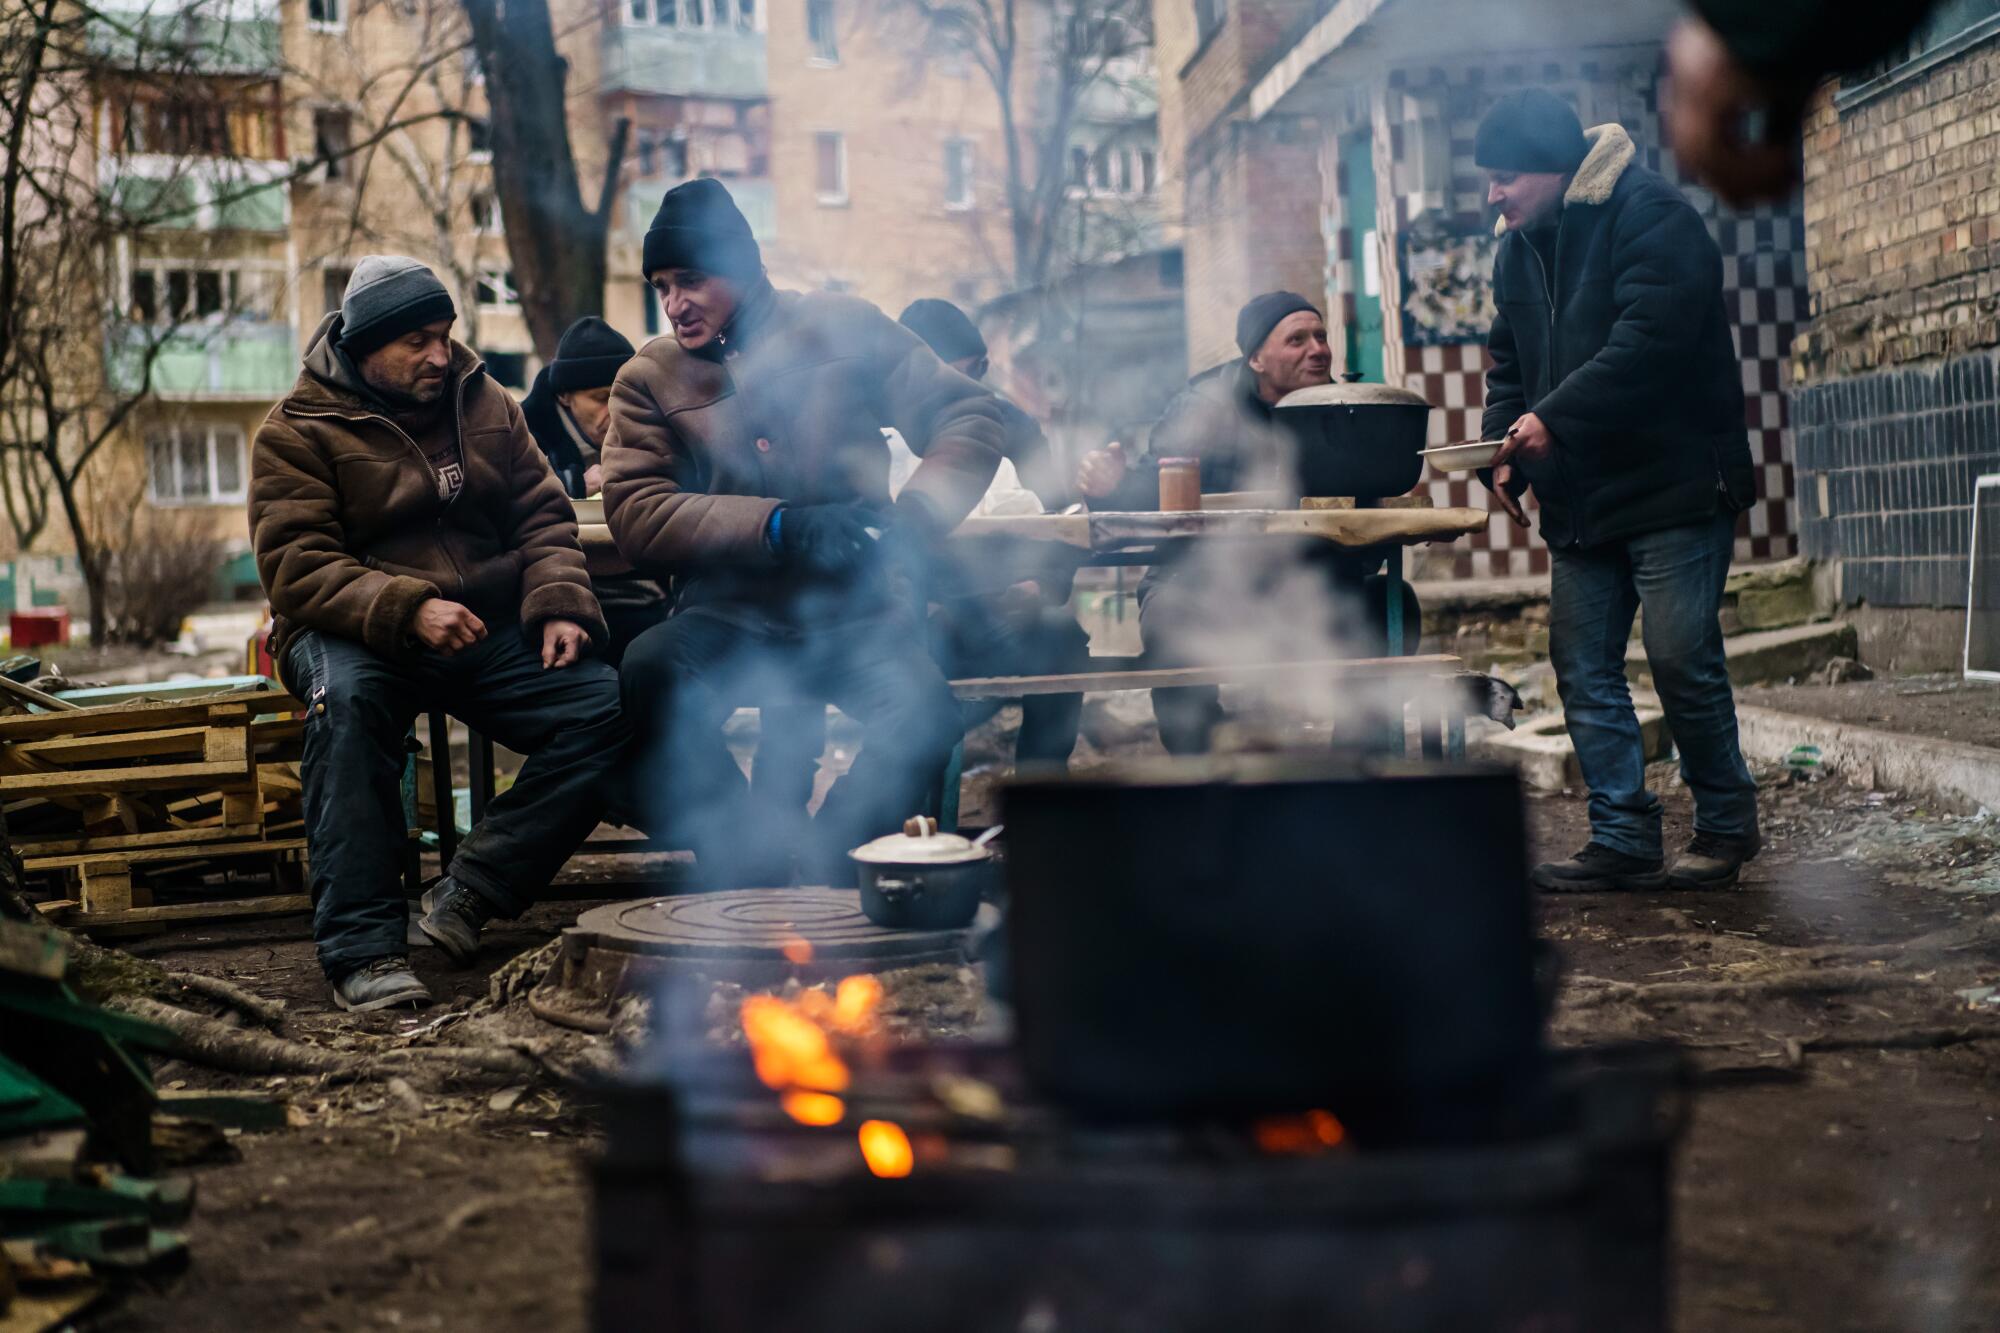 Men in coats and hats gather around outdoor fires with cooking pots